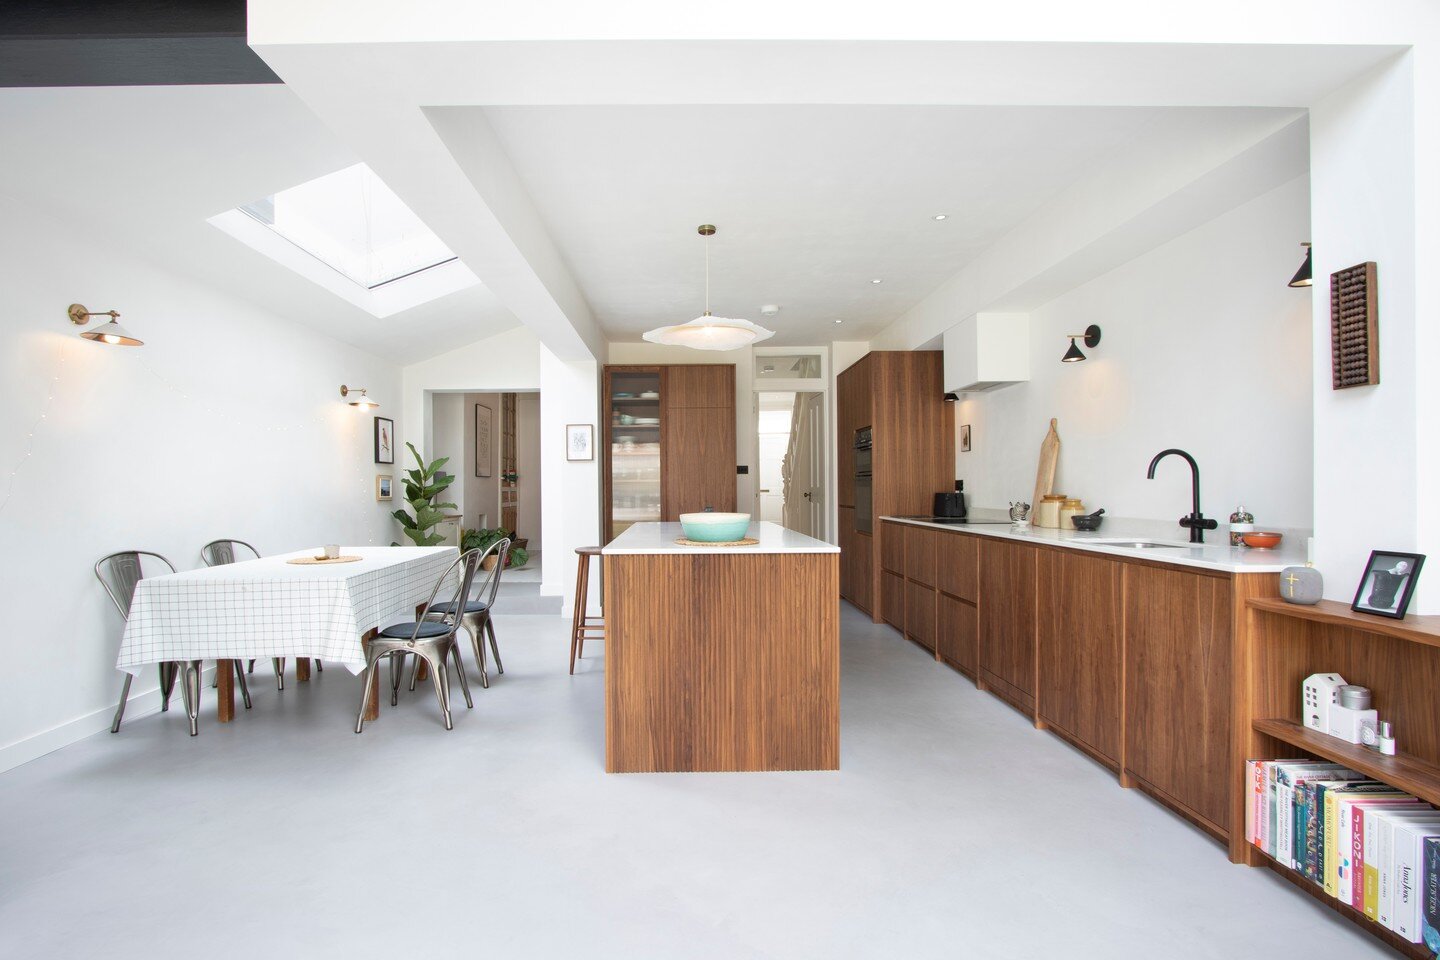 𝐇𝐨𝐰𝐚𝐫𝐝 𝐑𝐝. 
A a wider view of this gorgeous walnut kitchen. We love the how pale colour palette creates a calm, airy space. Some square reeding on the island end panel adds some subtle texture. 

📷 @fayehedgesphoto 

#kitchens #furniture #in